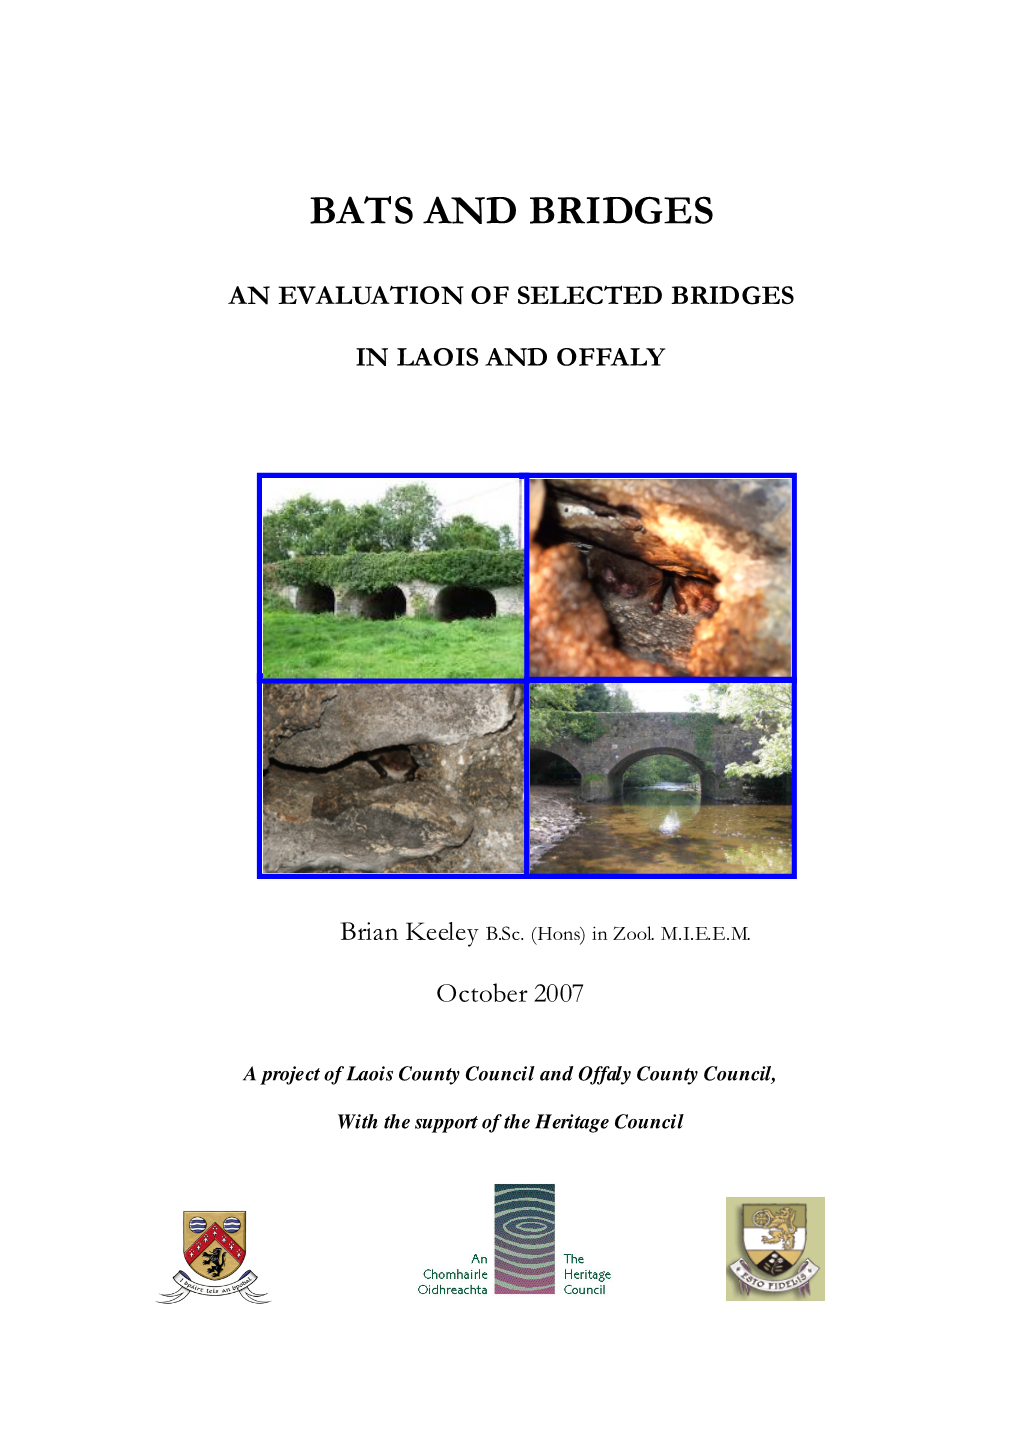 Survey of Bats in Bridges, Laois and Offaly 2007